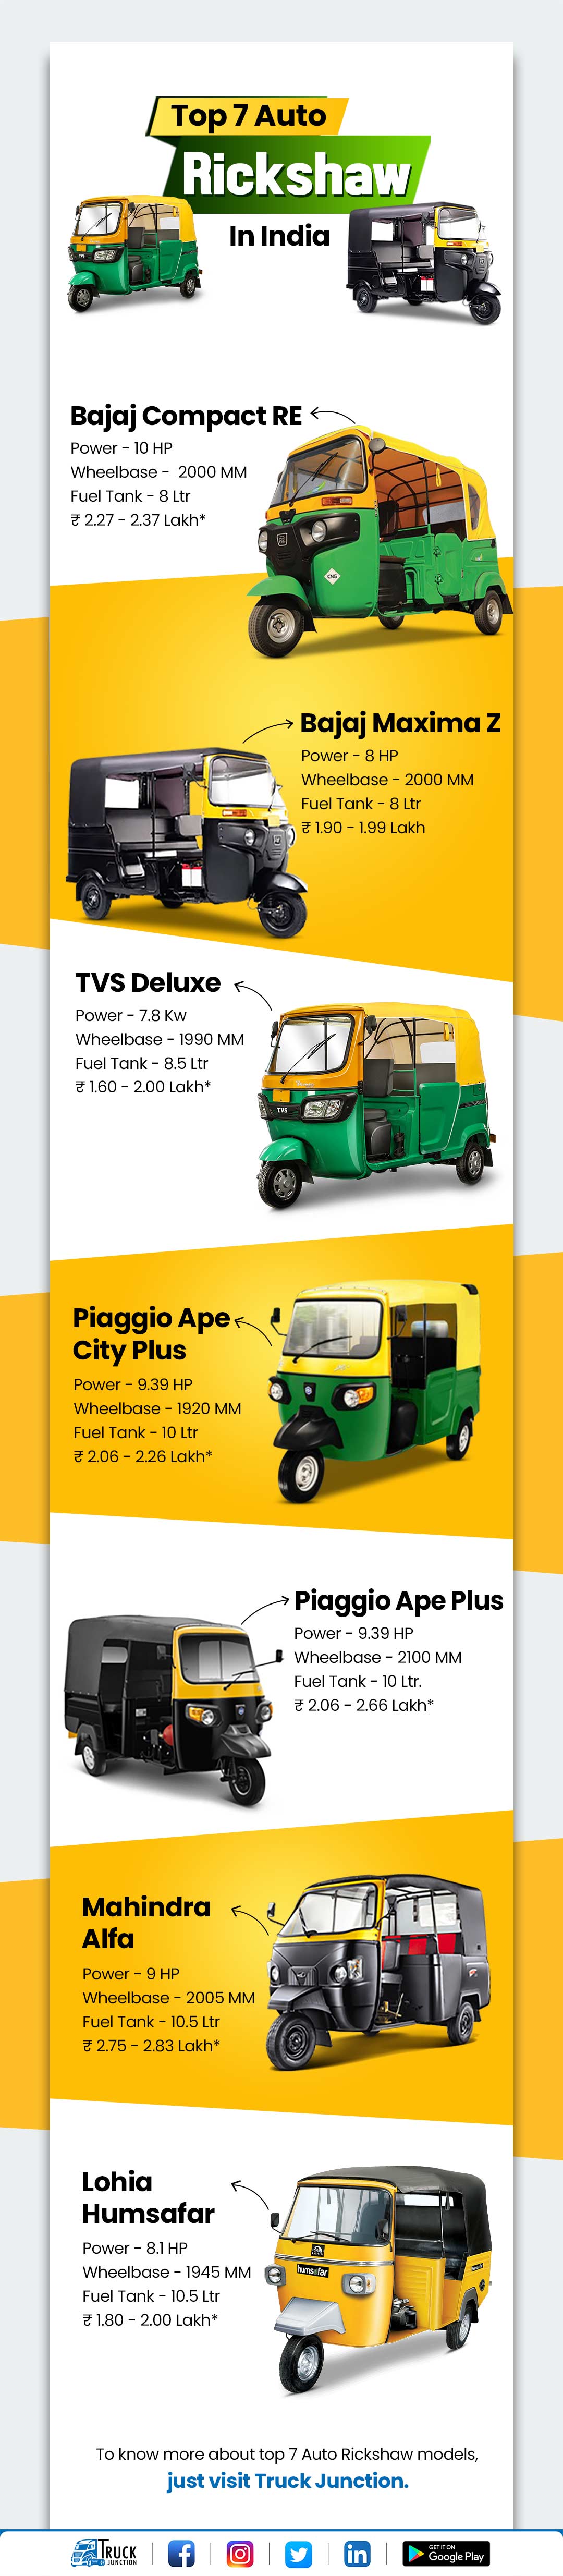 Best 7 Auto Rickshaw Models In India - Price & Overview